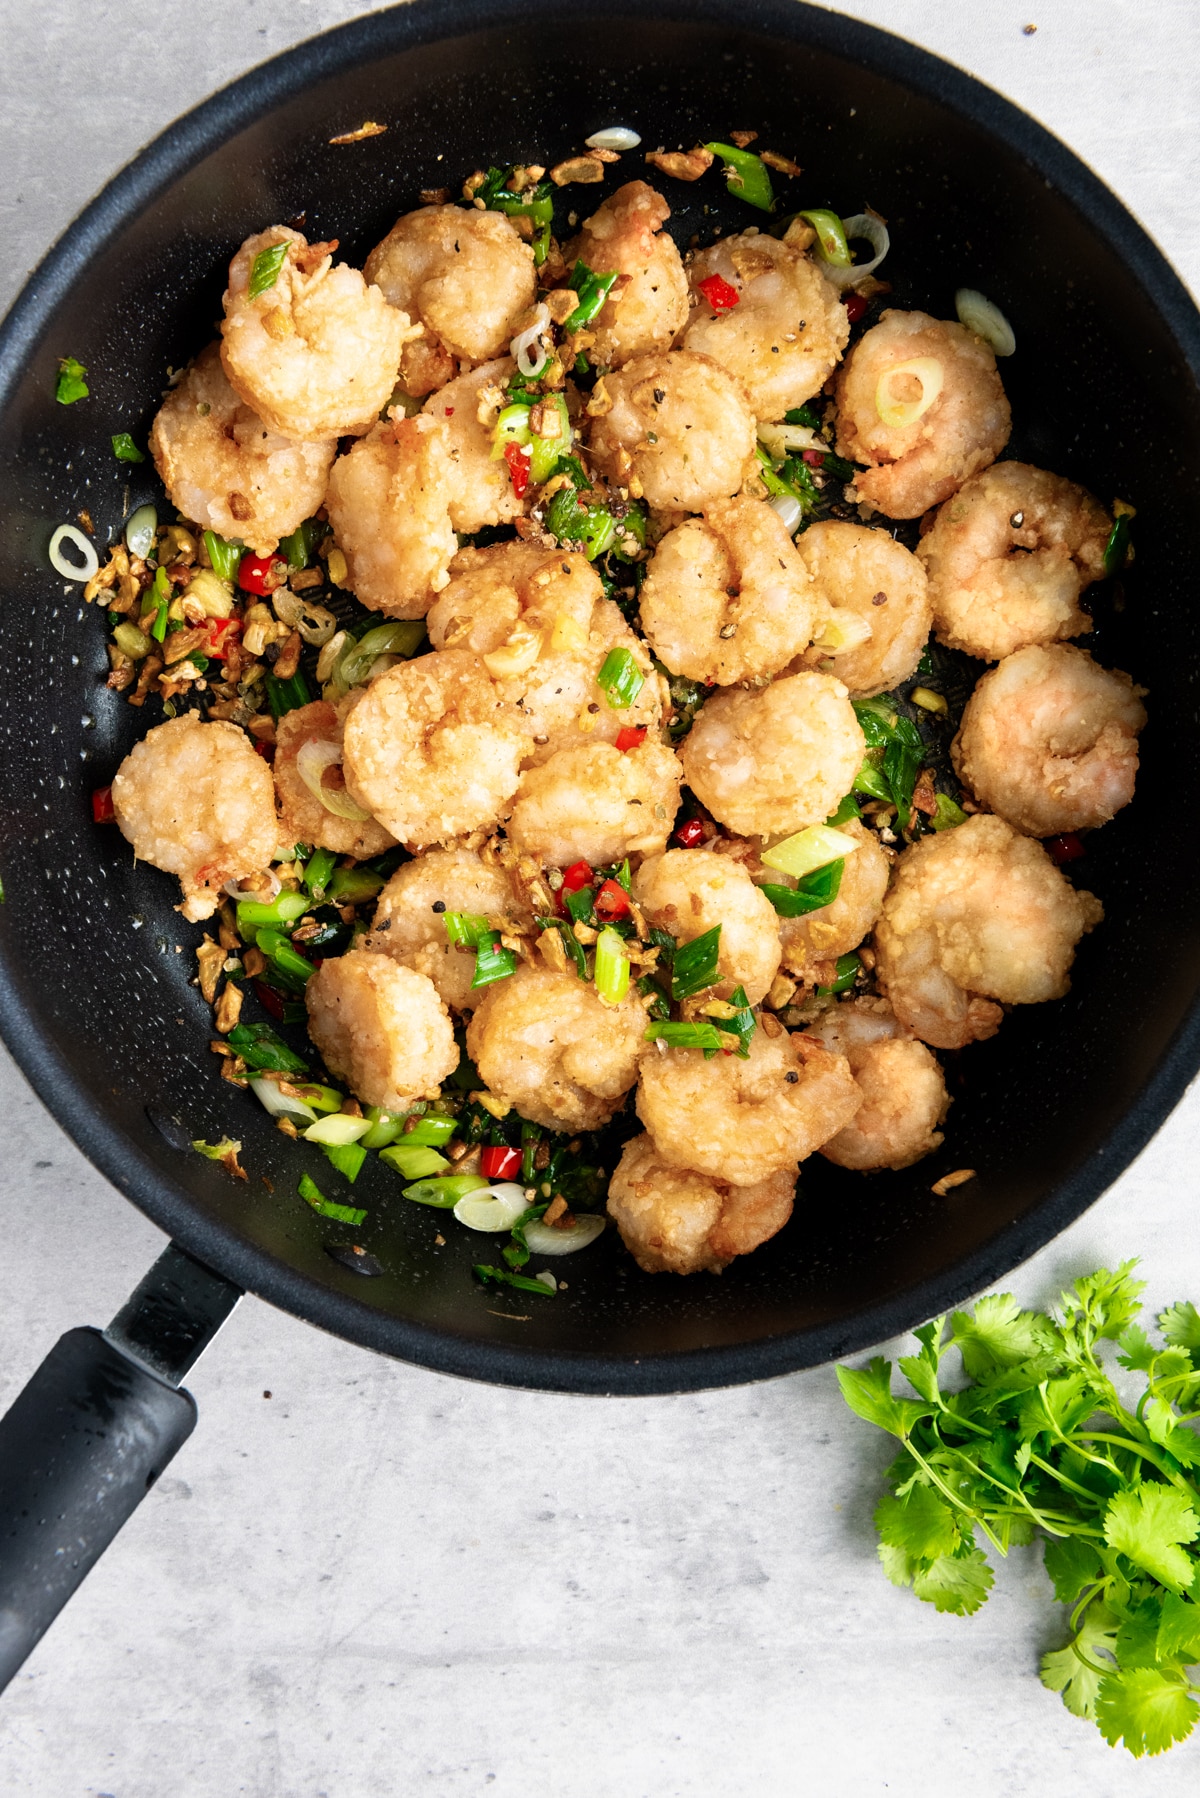 Chinese salt and pepper shrimp in a frying pan with sautéed vegetables and herbs on top on a gray surface with fresh cilantro on the side.